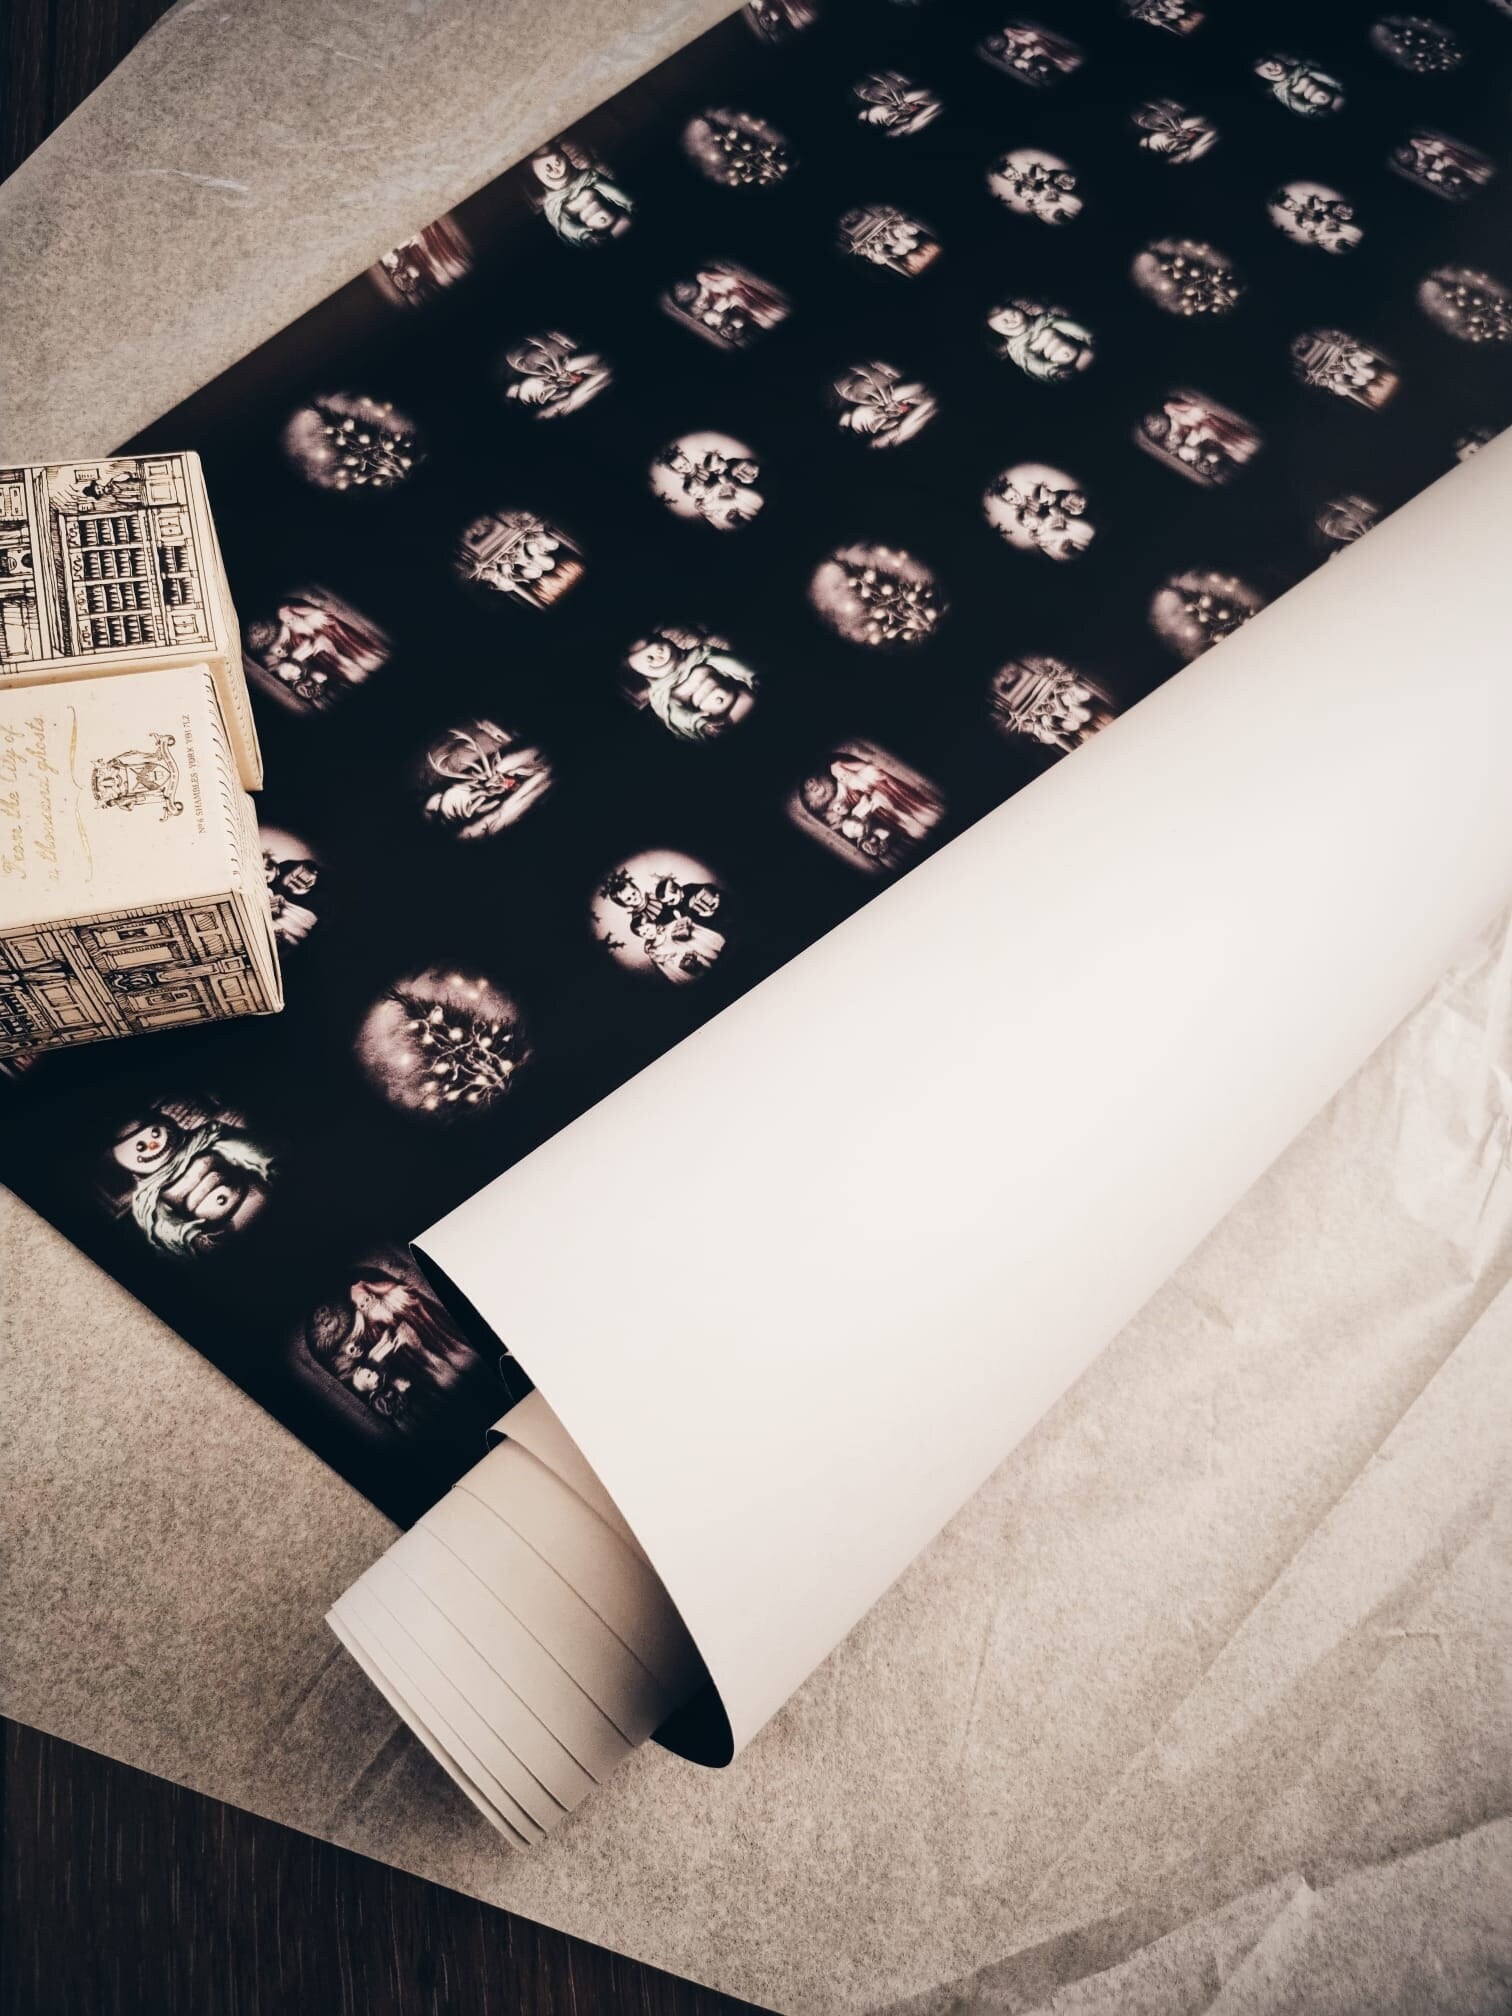 Forest Green Wrapping Paper Sheets, Moody Victorian Winter